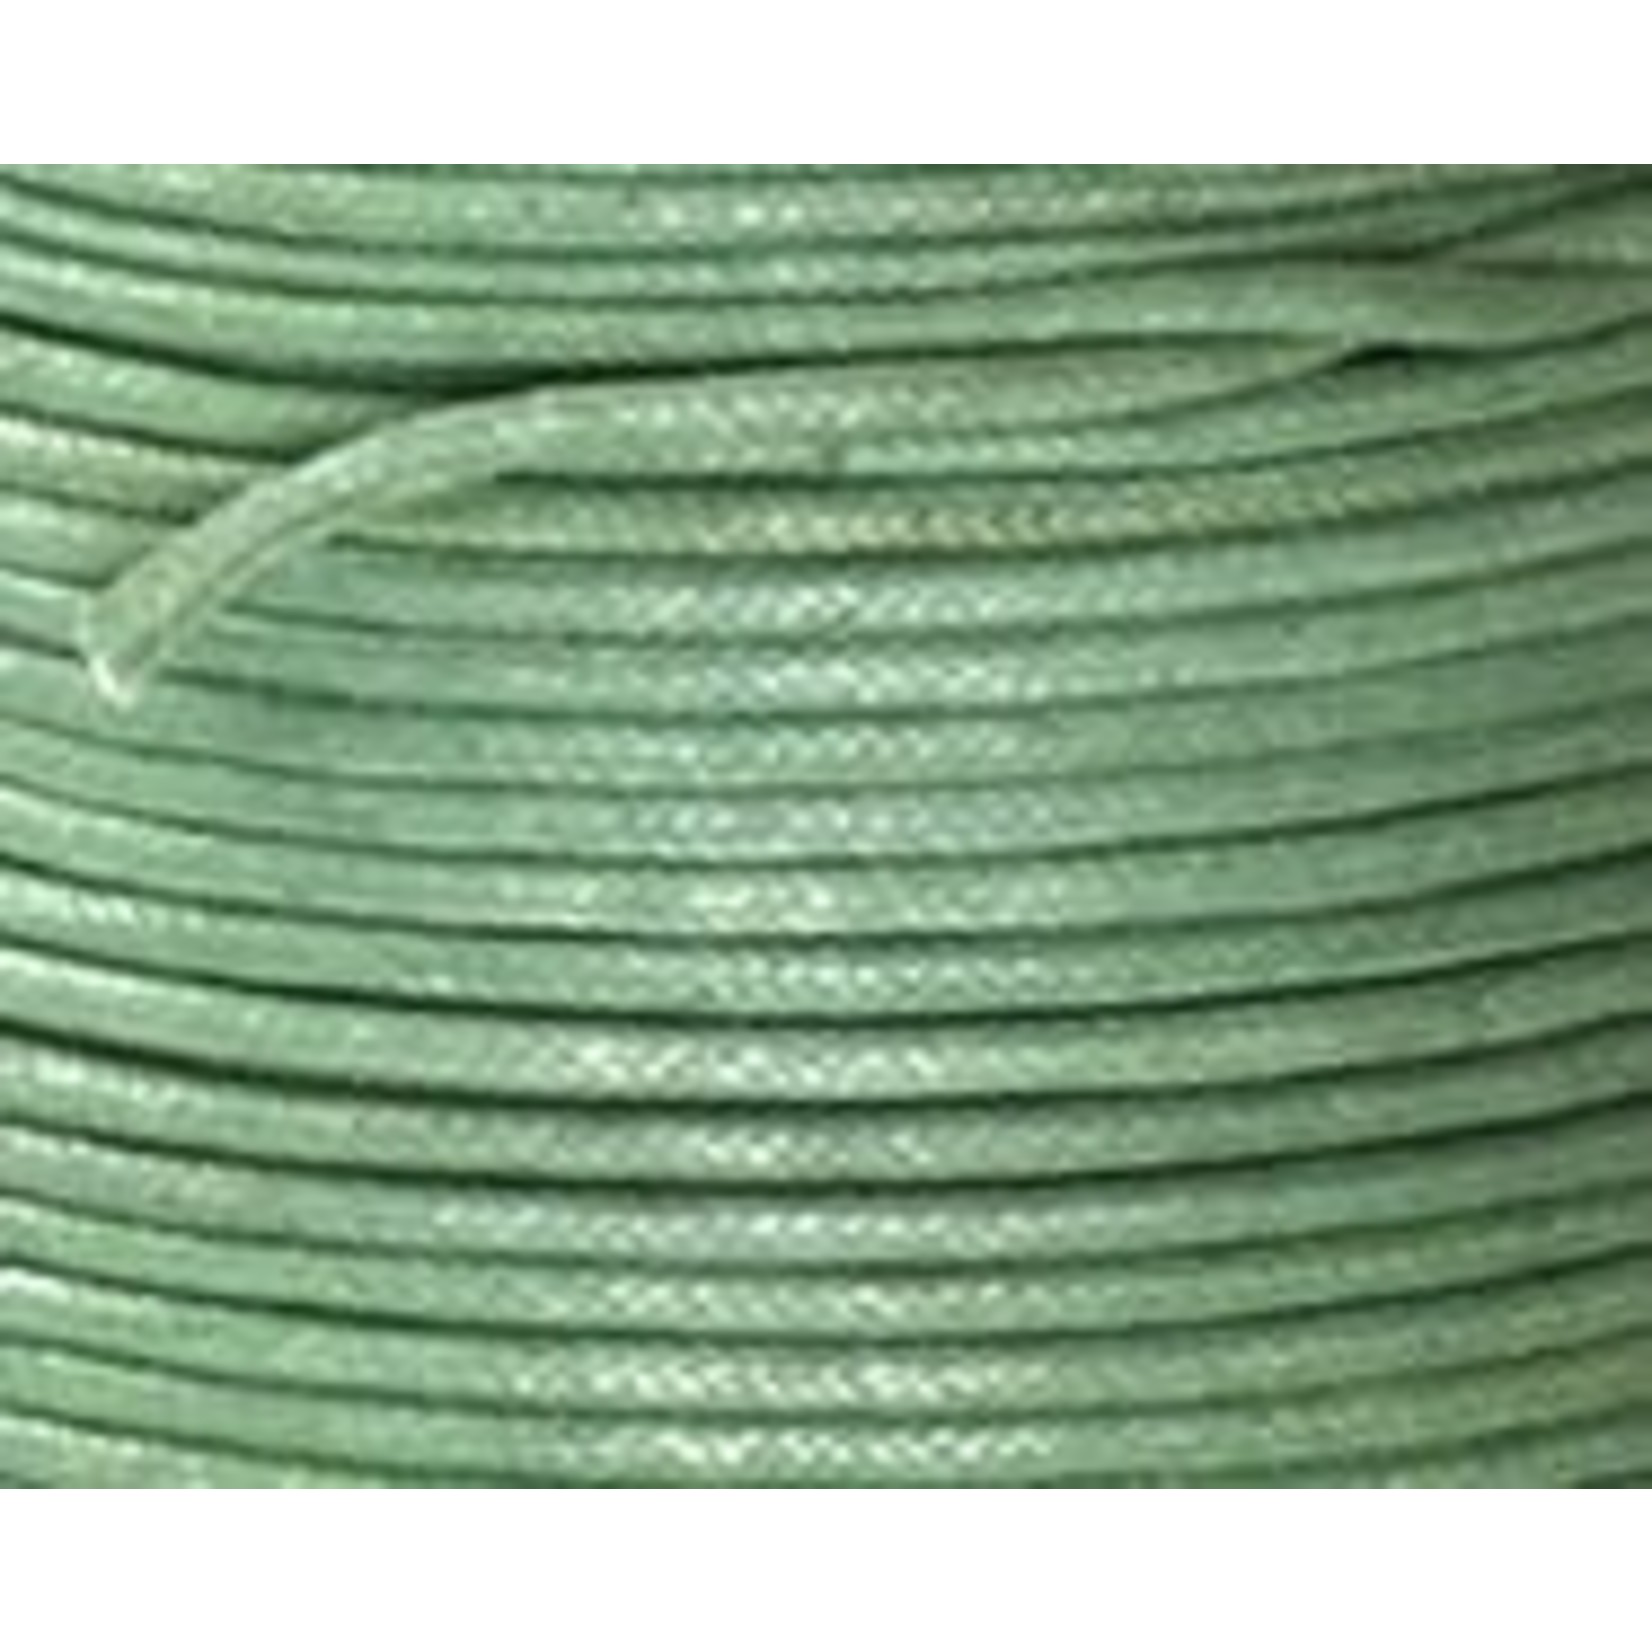 Mint Waxed Cotton Cord 2mm - 1 ft